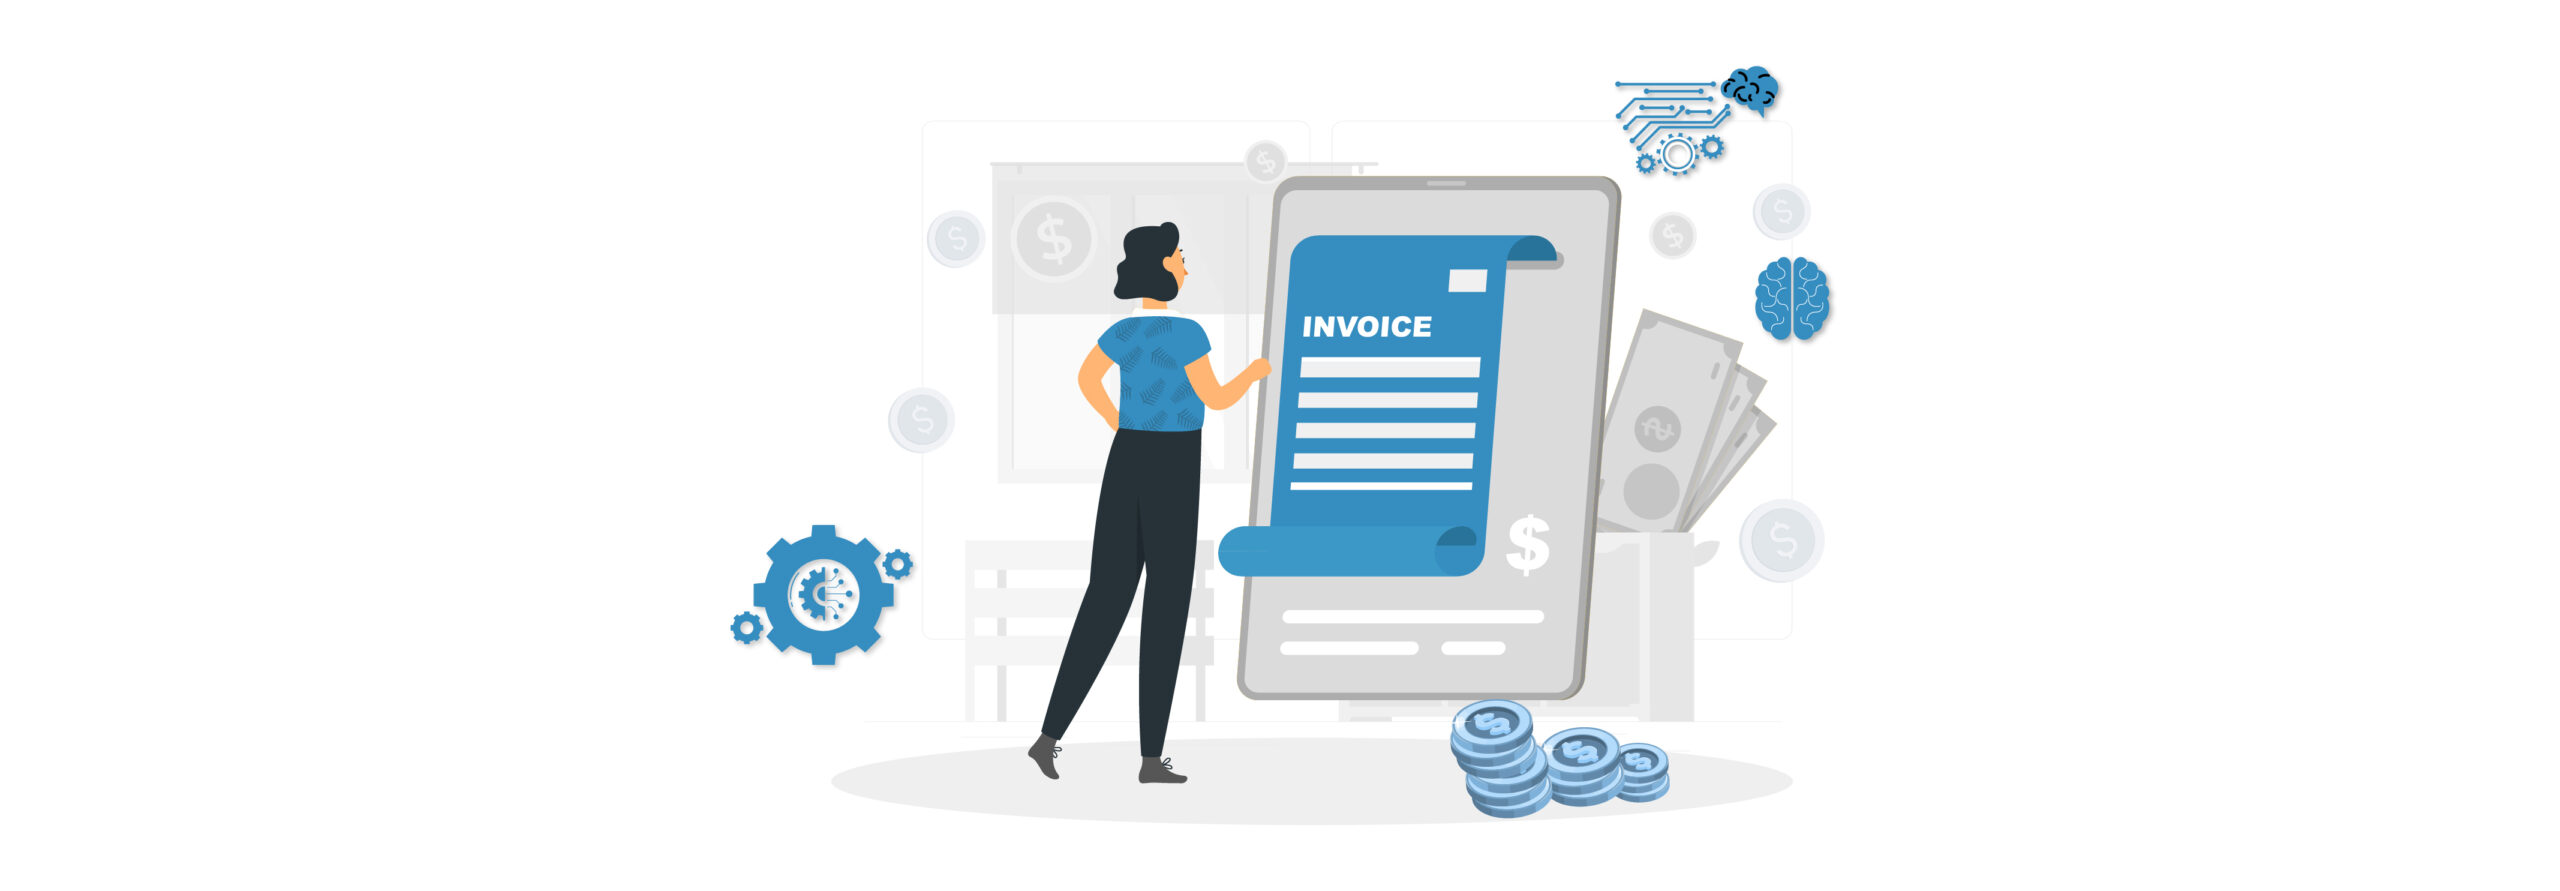 How Does Invoice Automation Help With These Challenges?